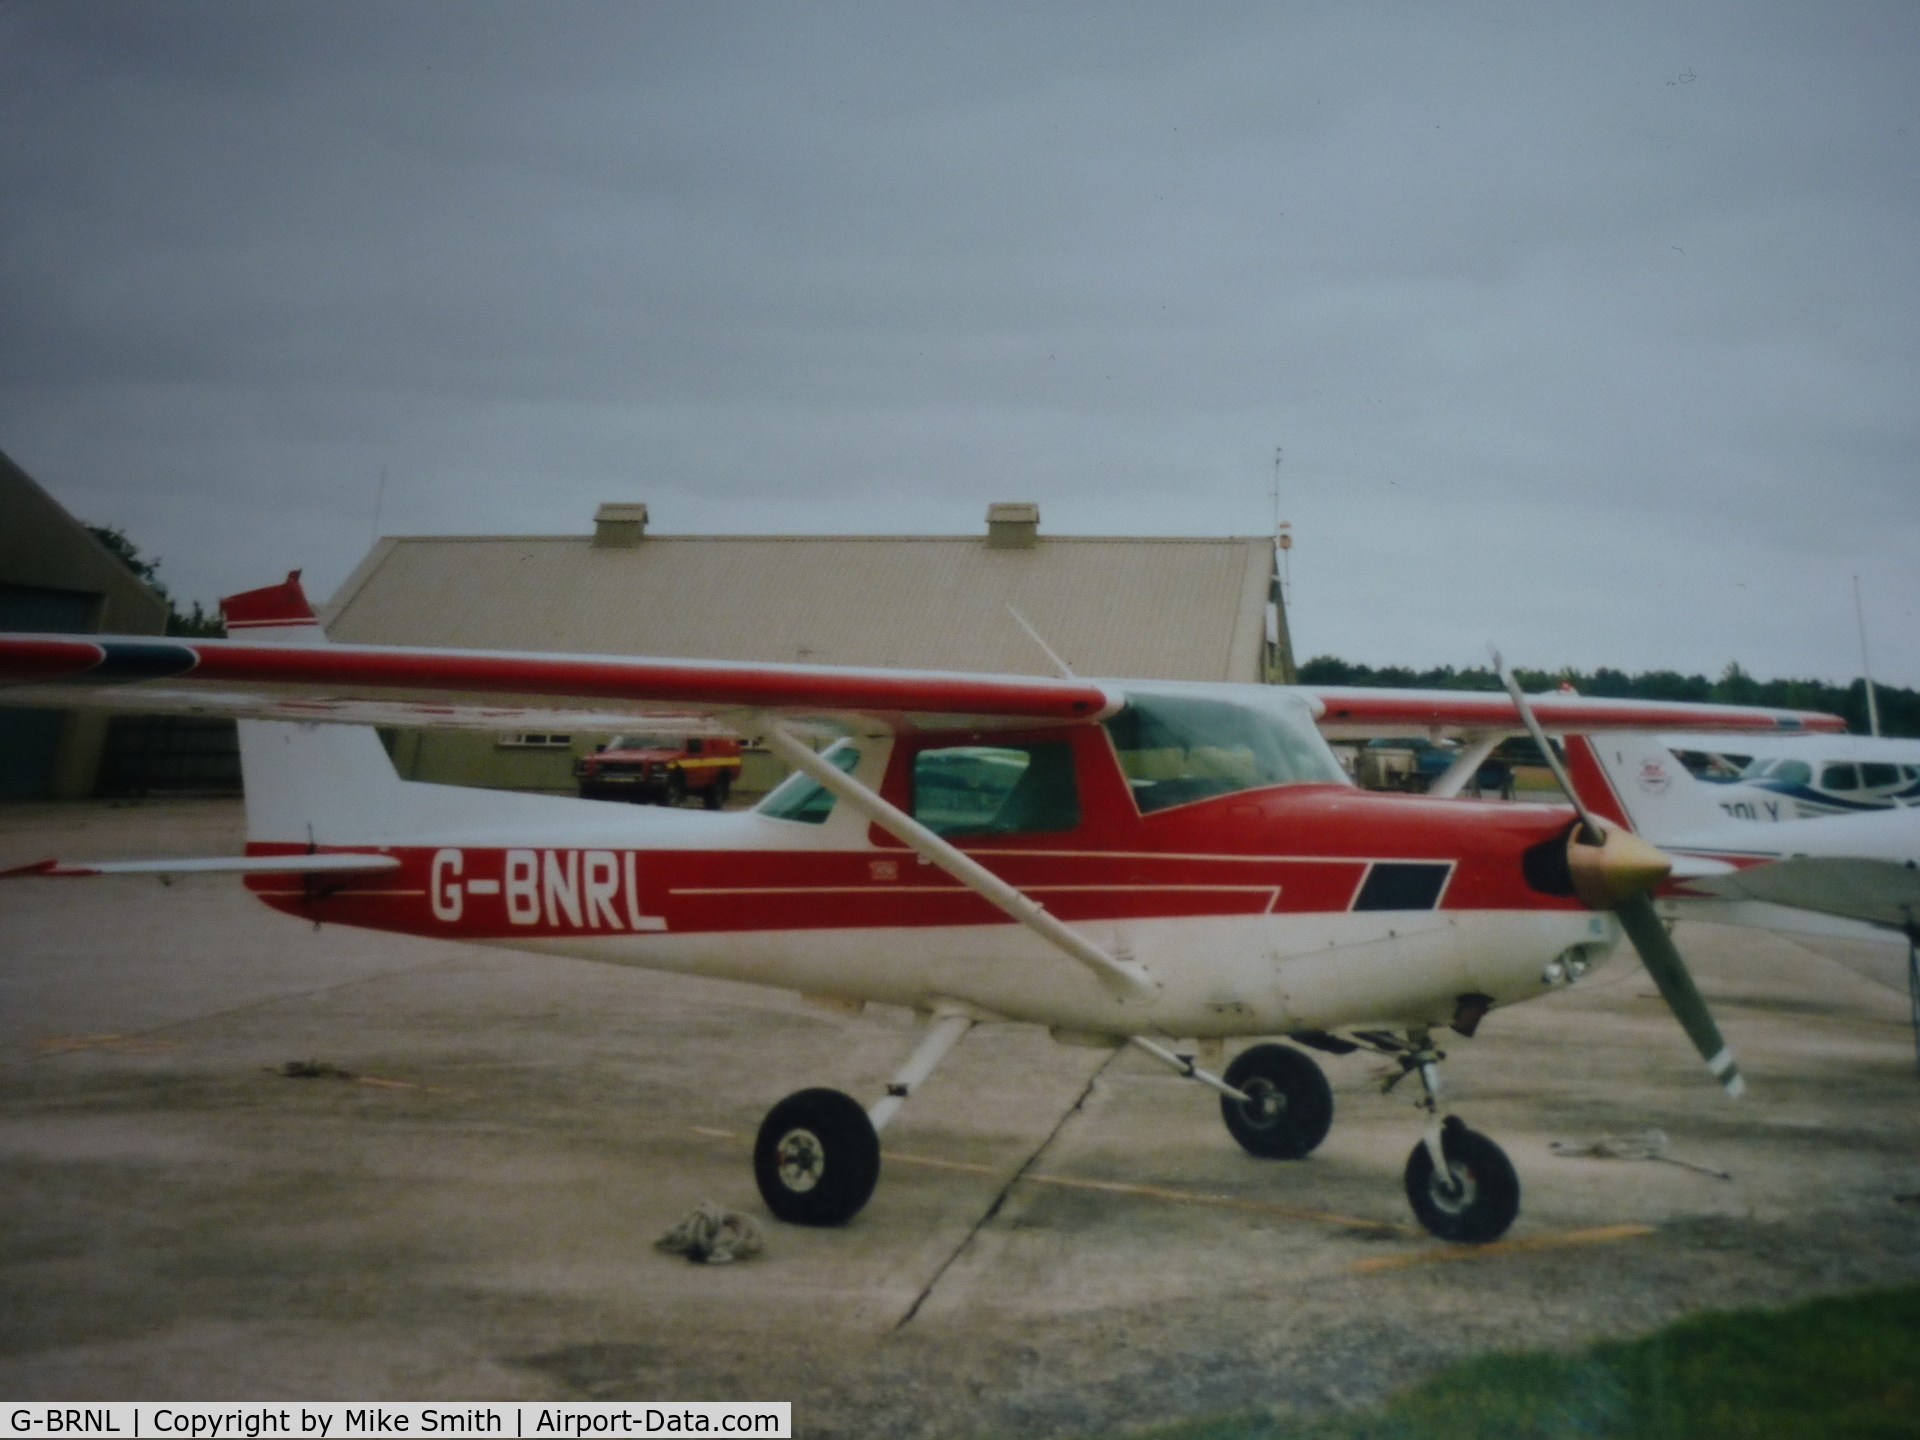 G-BRNL, 1983 Cessna 172P C/N 172-75887, At Earls Colne where I had lessons around 2005